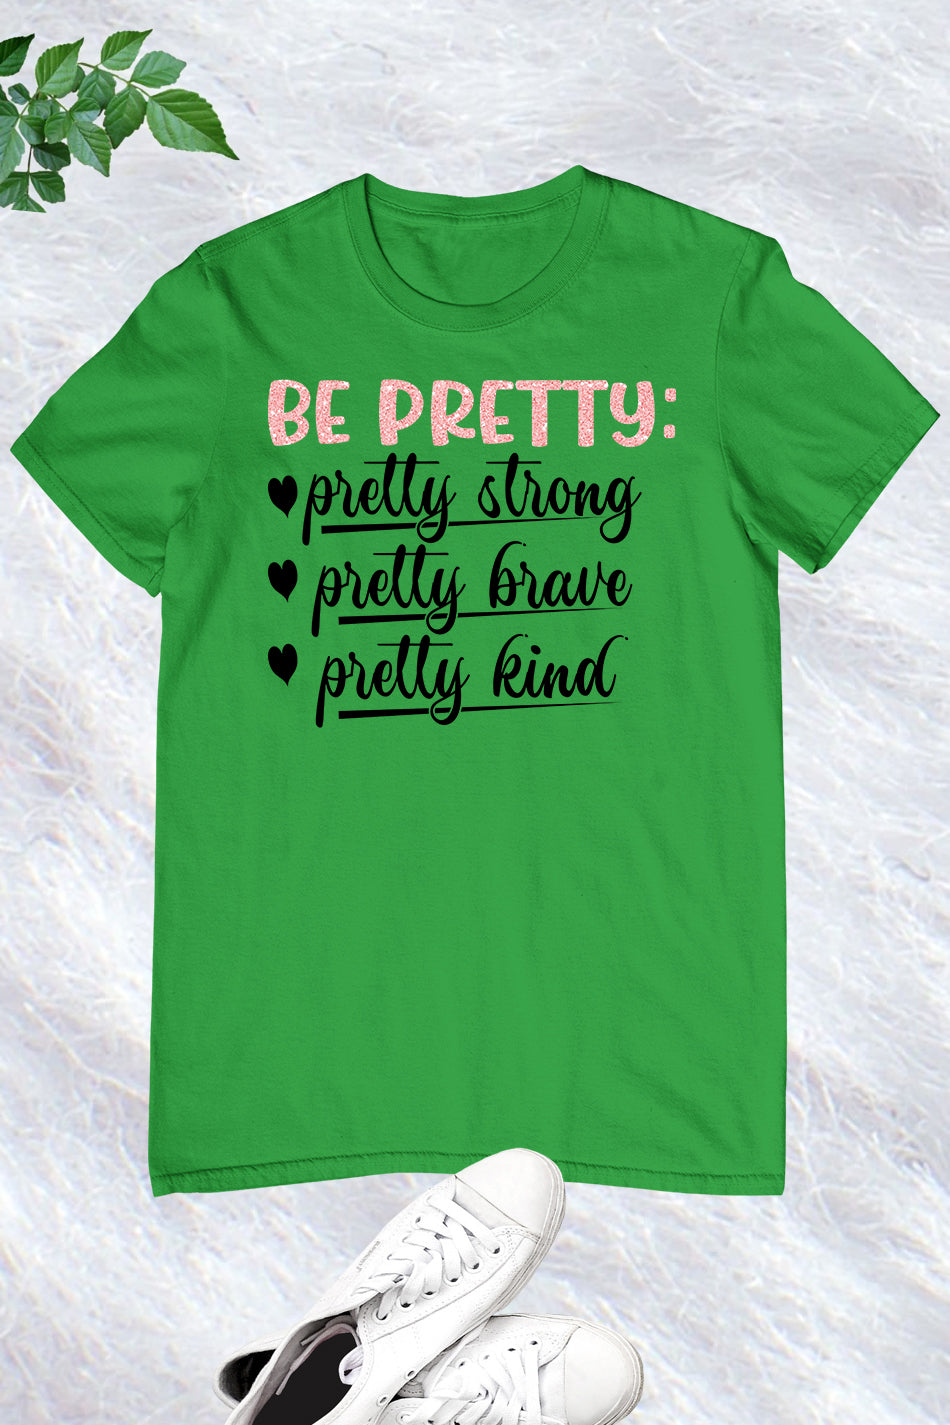 Be Pretty Strong, Brave, and Kind Women Shirt